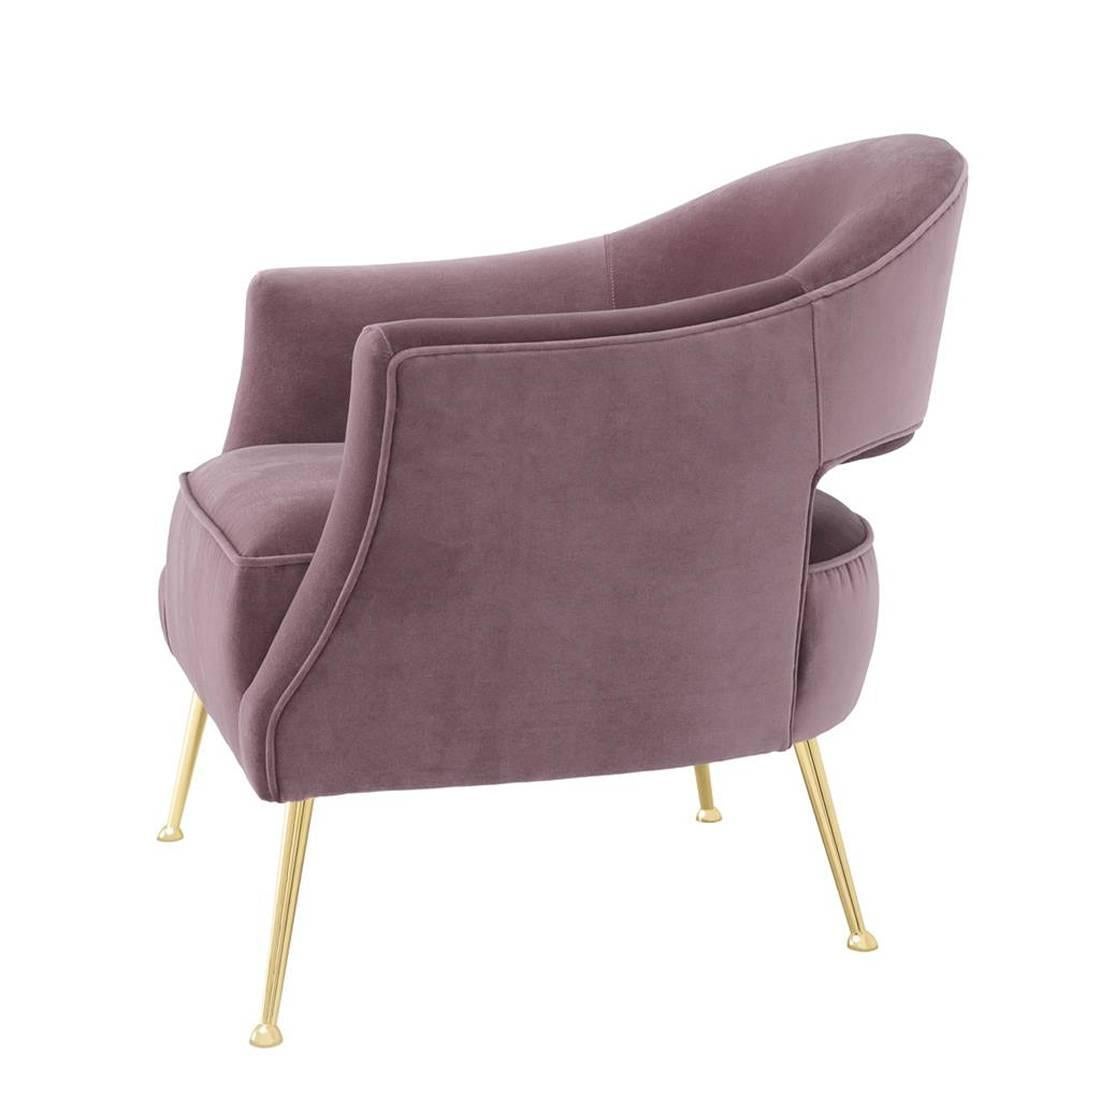 Armchair Parma with solid wood structure,
upholstered with purple velvet fabric, fire
retardant treatment. With brass legs.
 